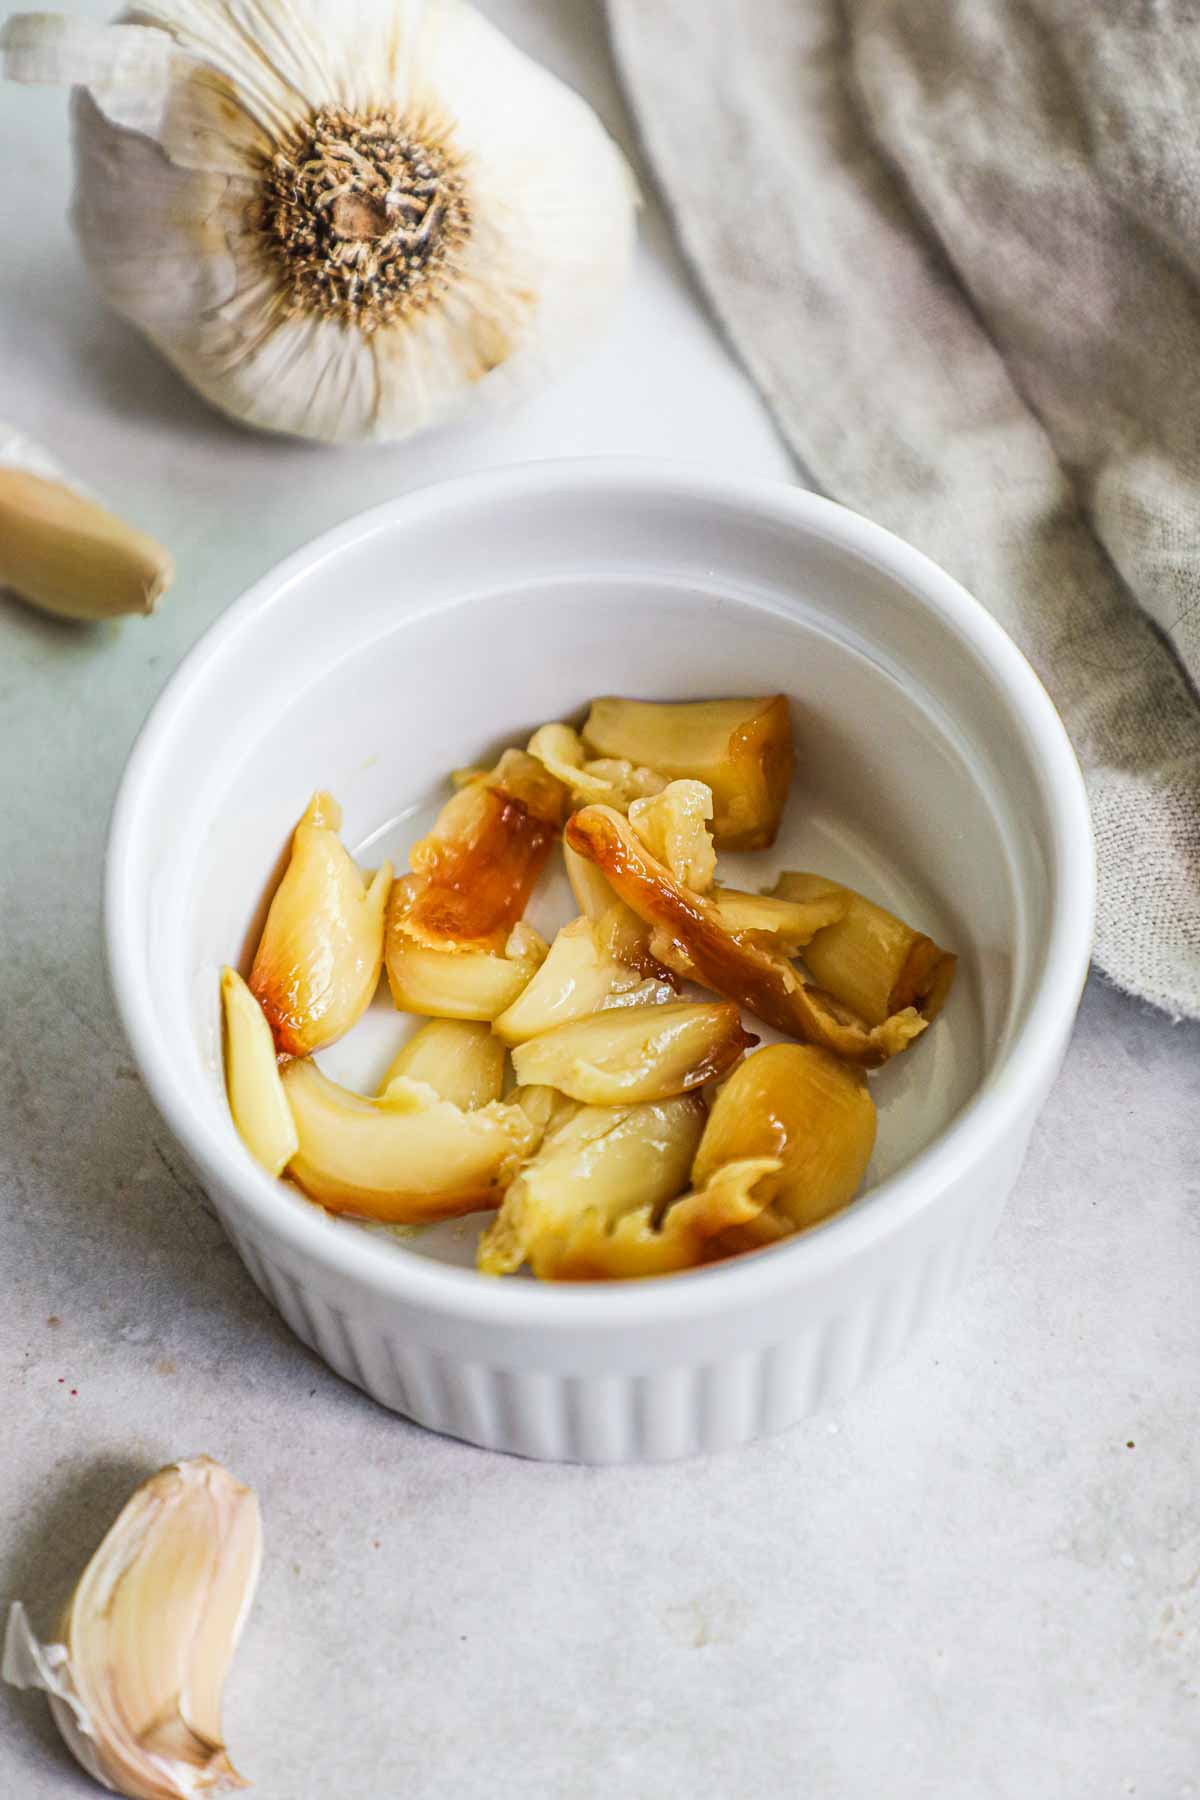 Oven-roasted garlic removed from the garlic paper and served in a ramekin.